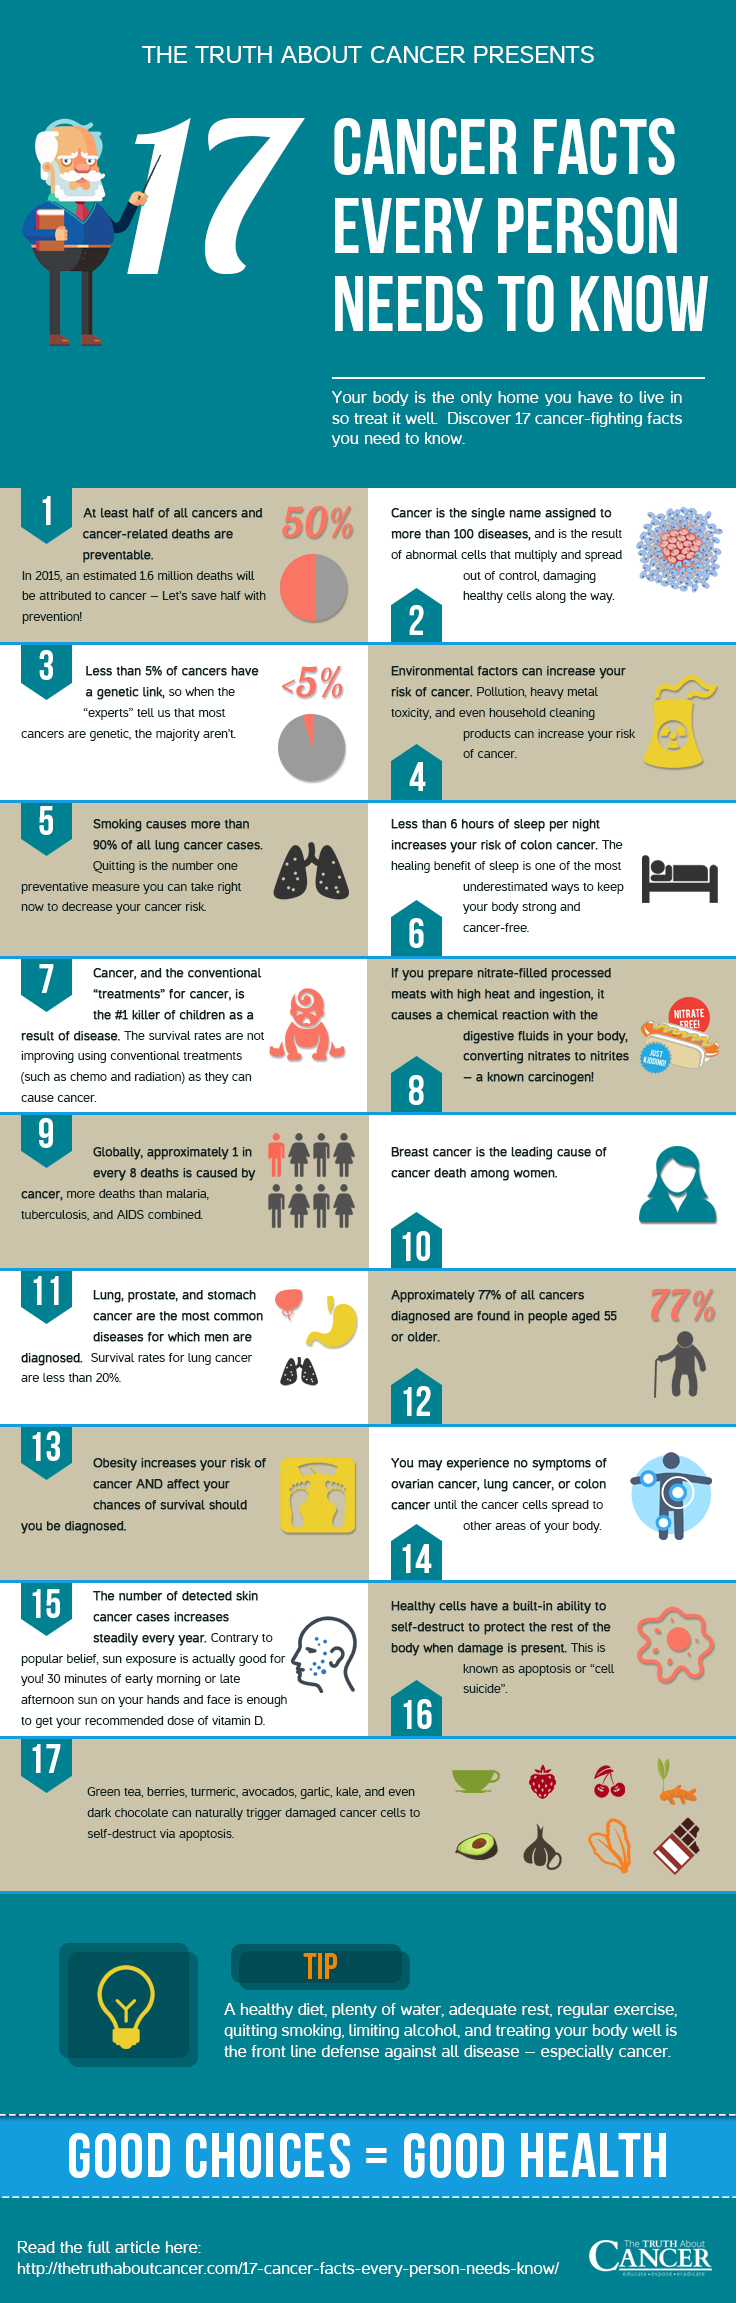 17-Cancer-Facts-infographic